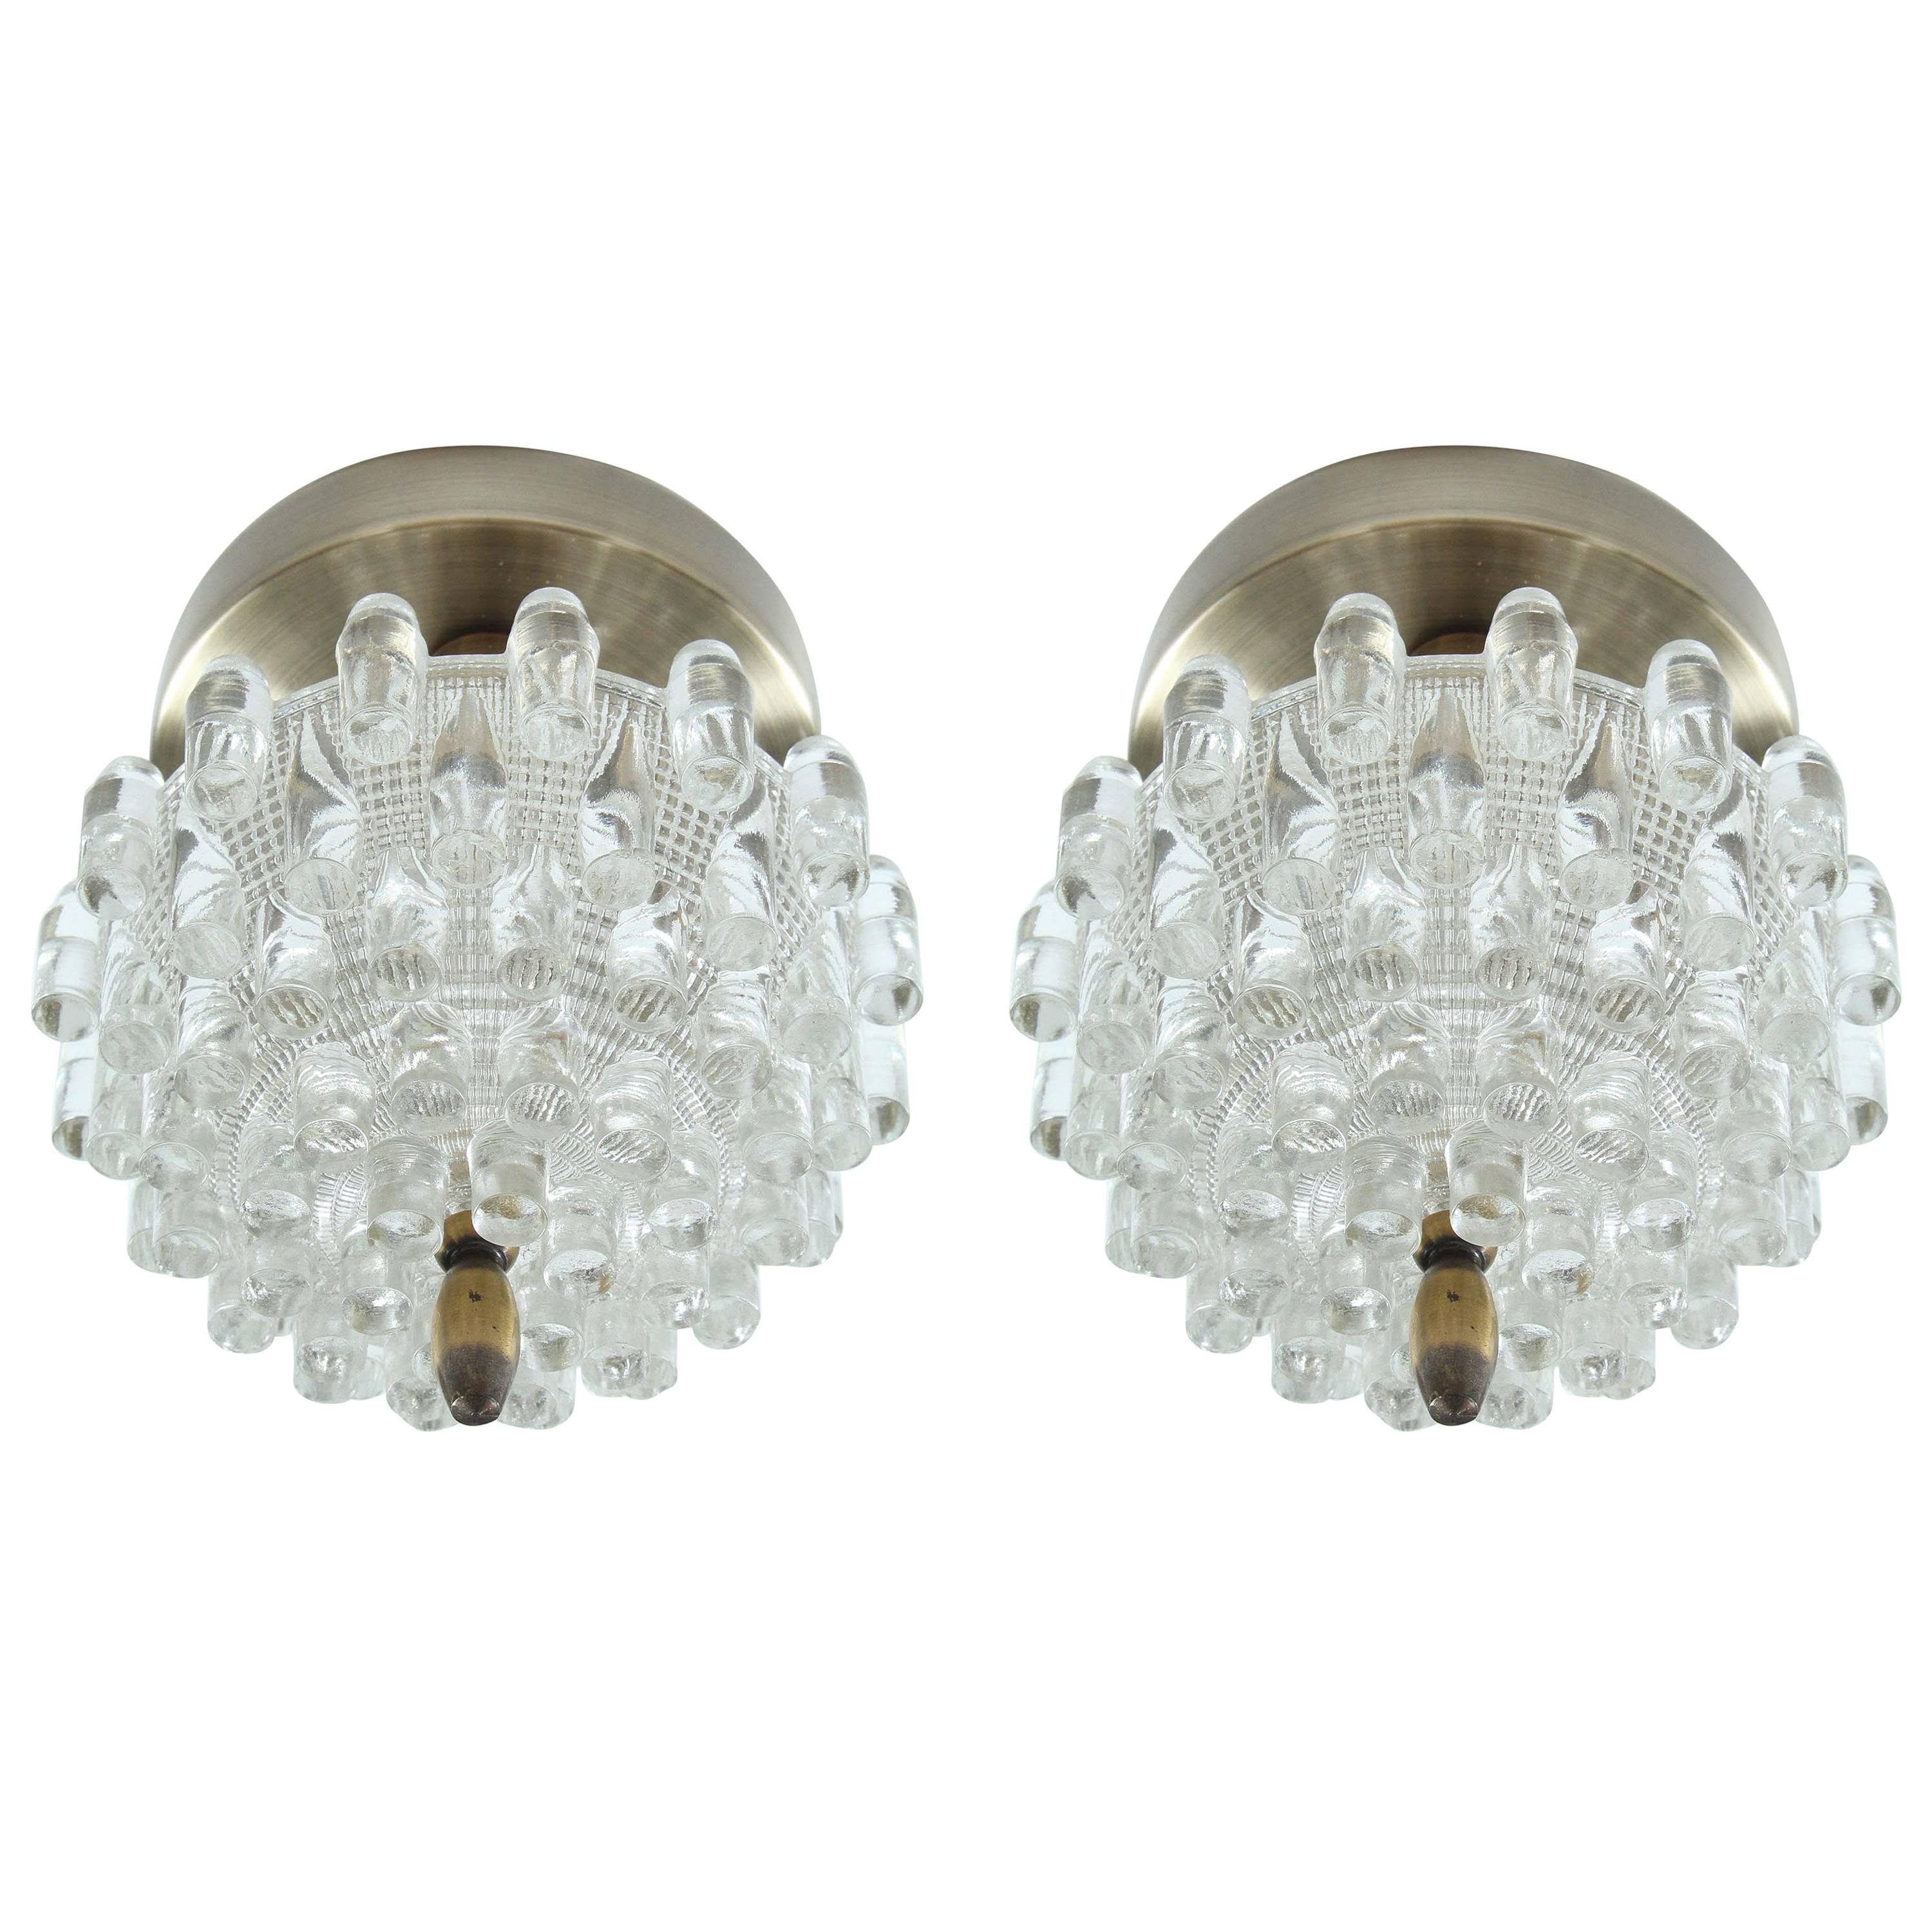 Pair of Unusual Moulded Glass Sconces For Sale